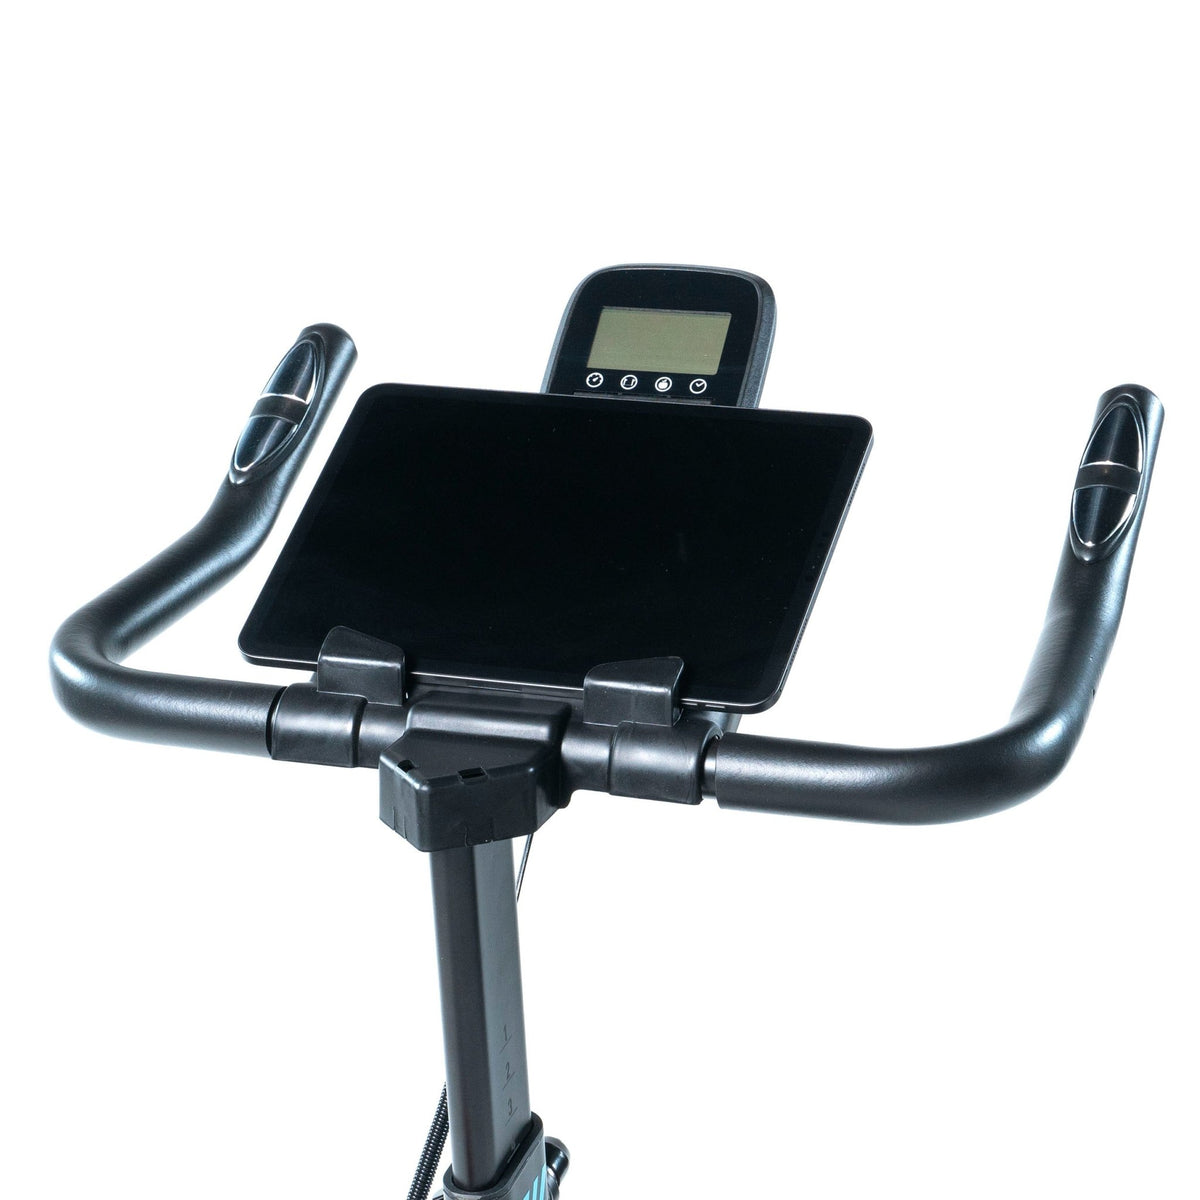 FitWay Equip. 500IC Indoor Cycle  tablet holder view